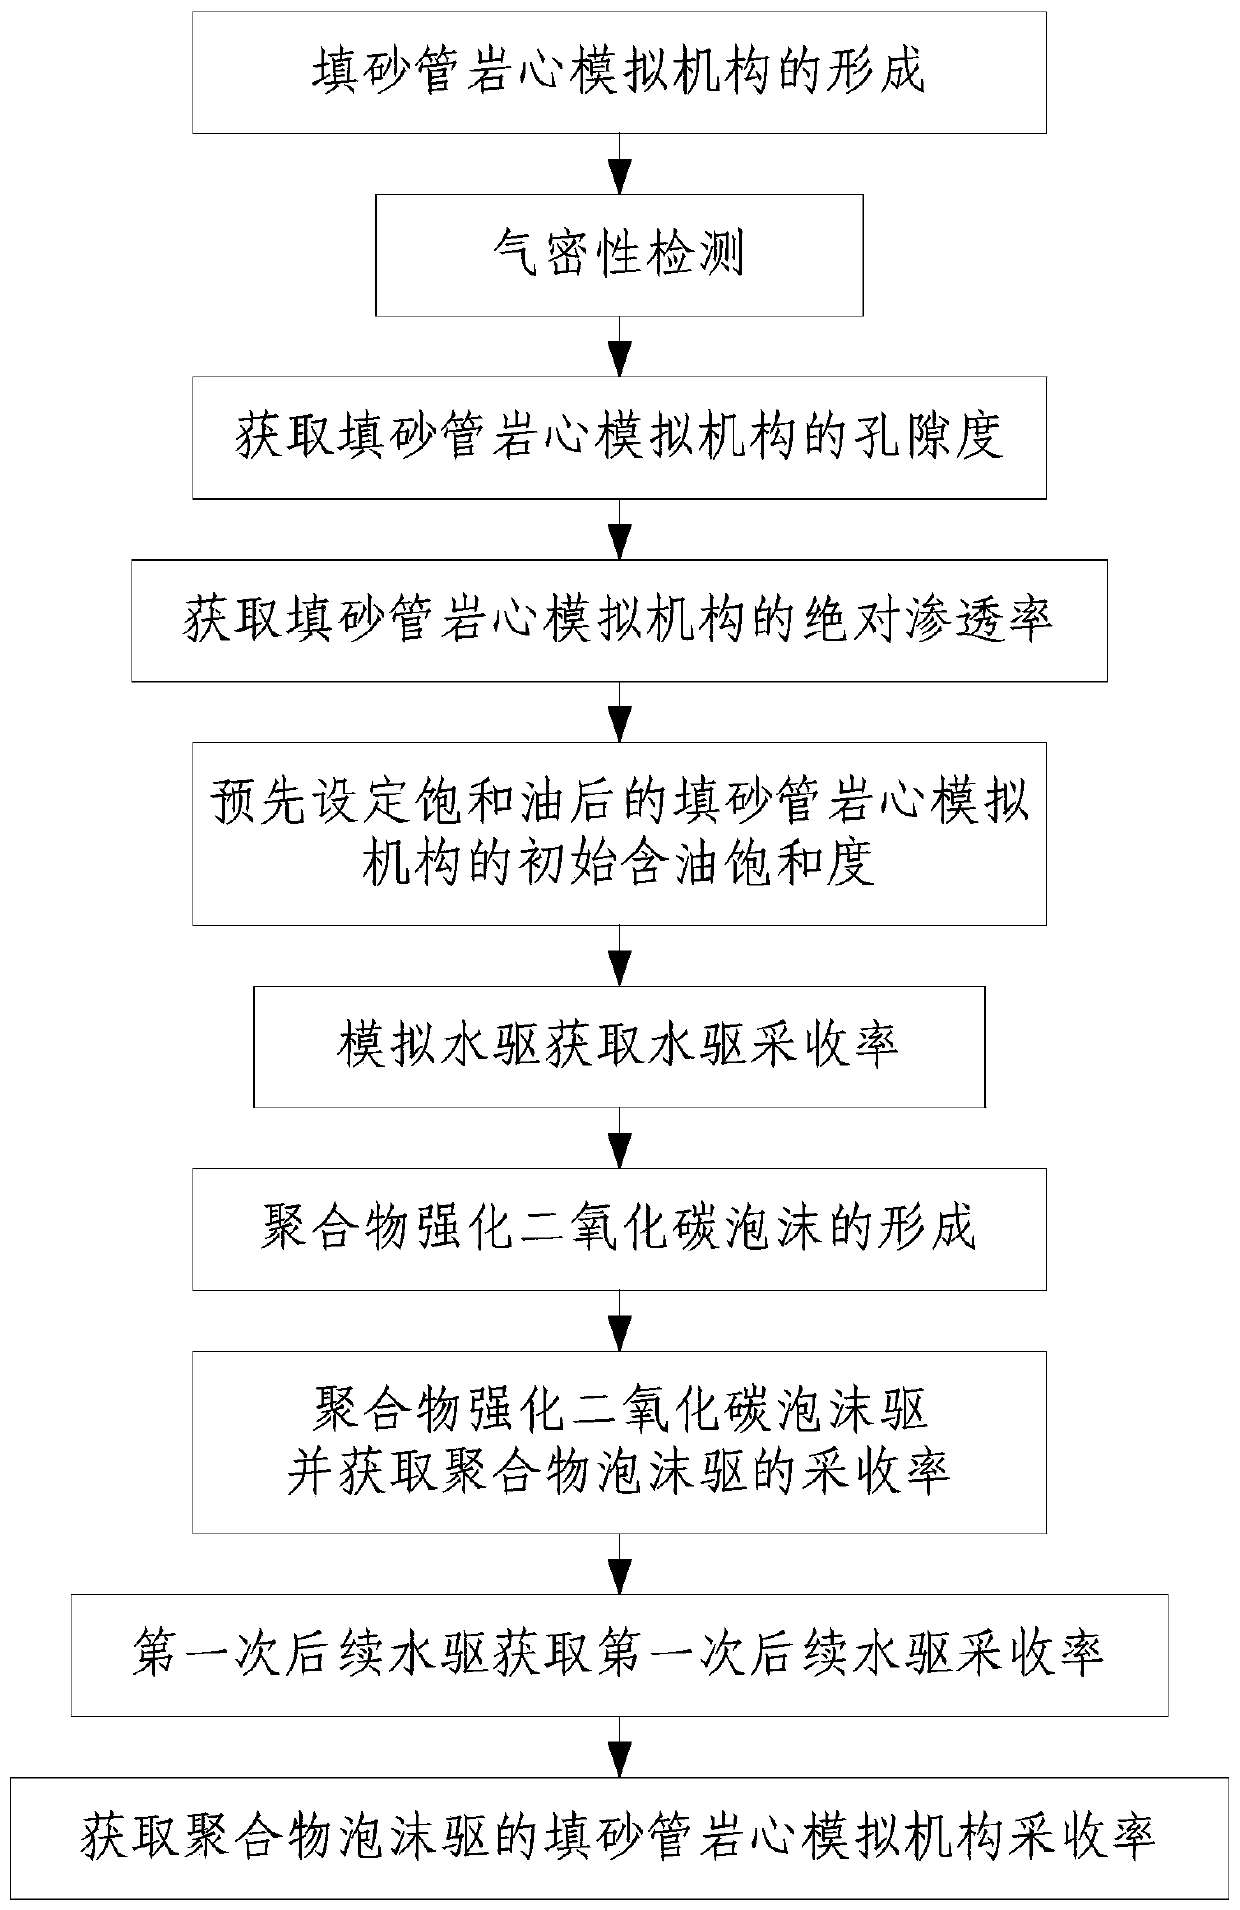 Device and method for improving recovery of thin-bed heavy oil reservoirs based on foam flooding